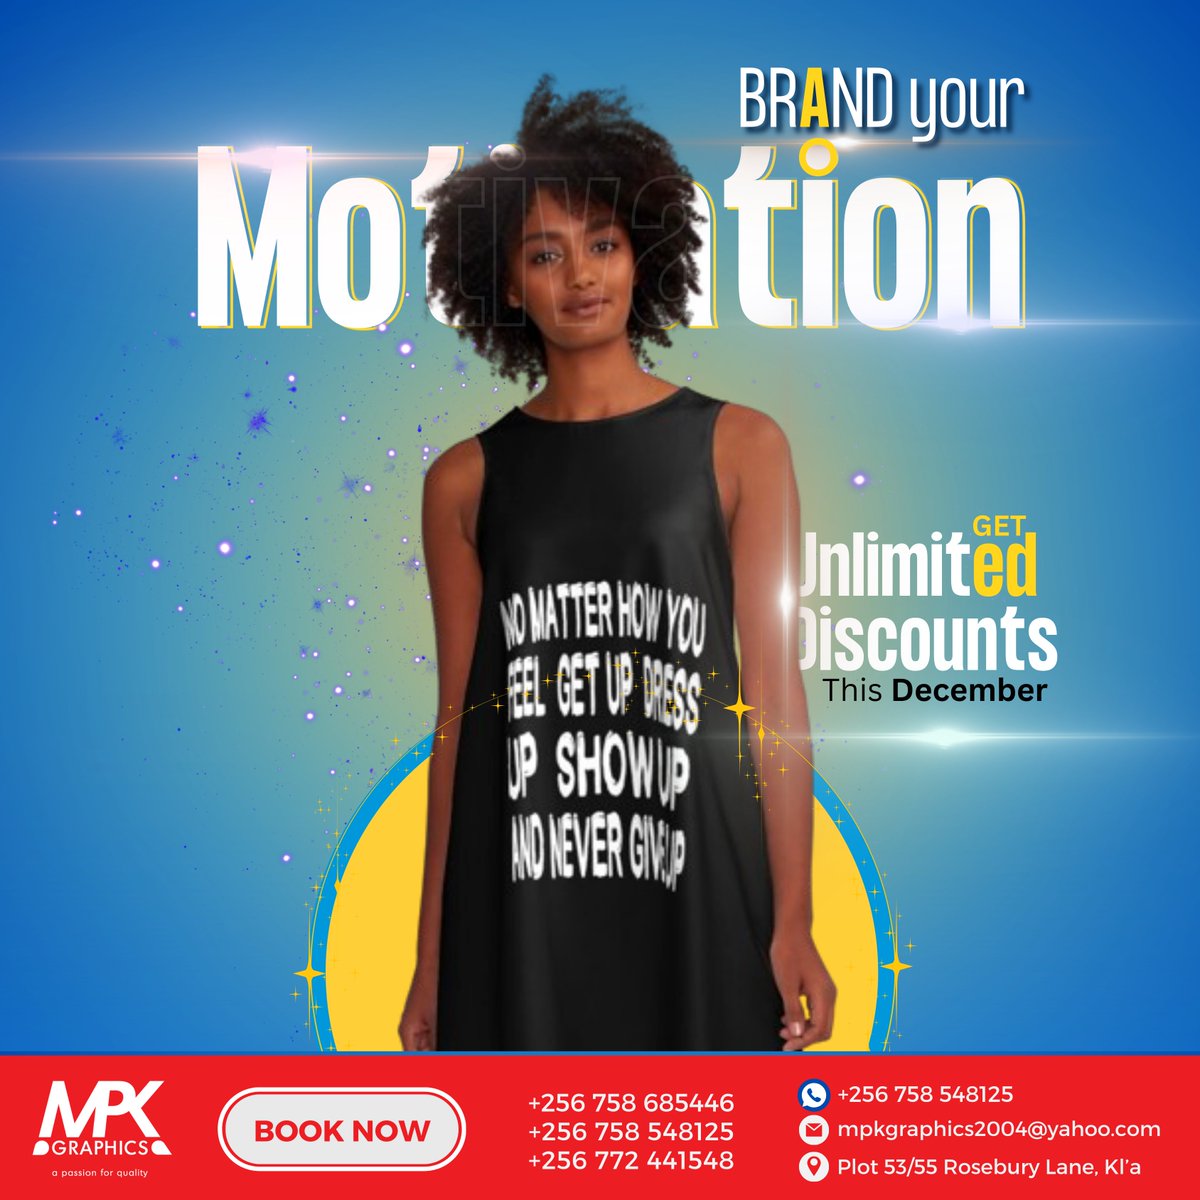 Looking for dressing motivational? We can print any phrase of your choice on any clothing or item! #tshirts #Caps #MAGS #hoodies #jumpers #phonesdownfistsup #tshirts Simply Check the numbers below or Click; mpk-graphics.com